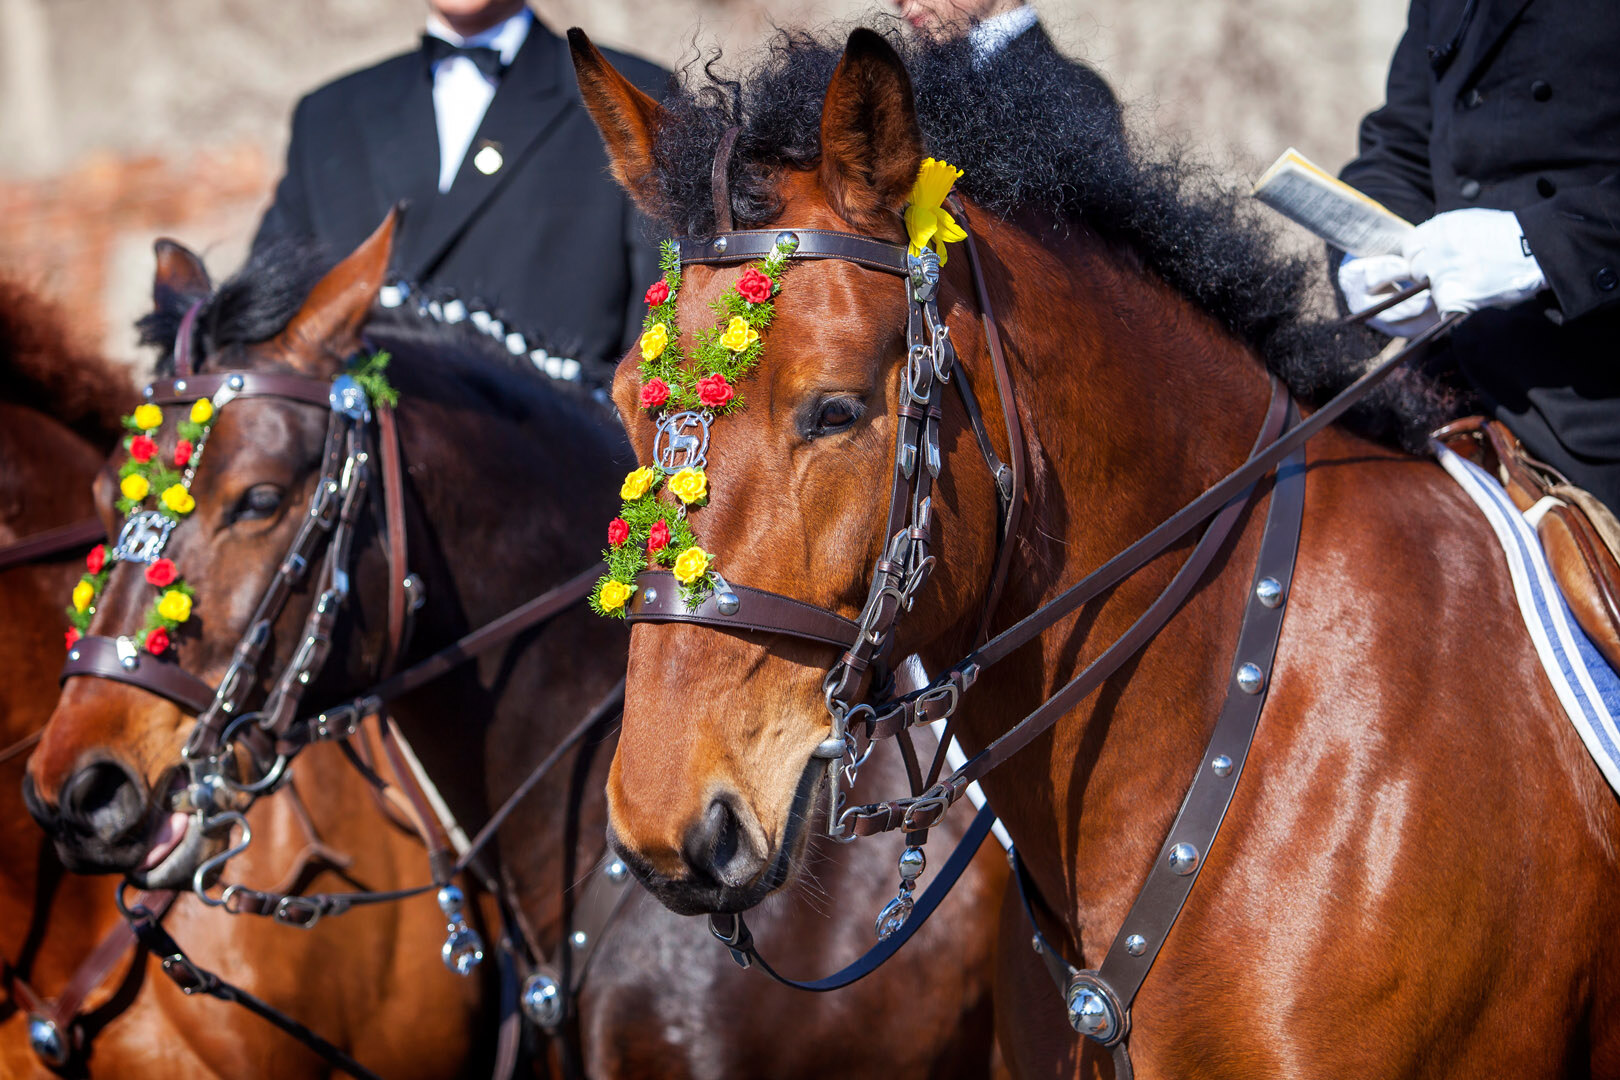 Horses have been decorated with flowers.